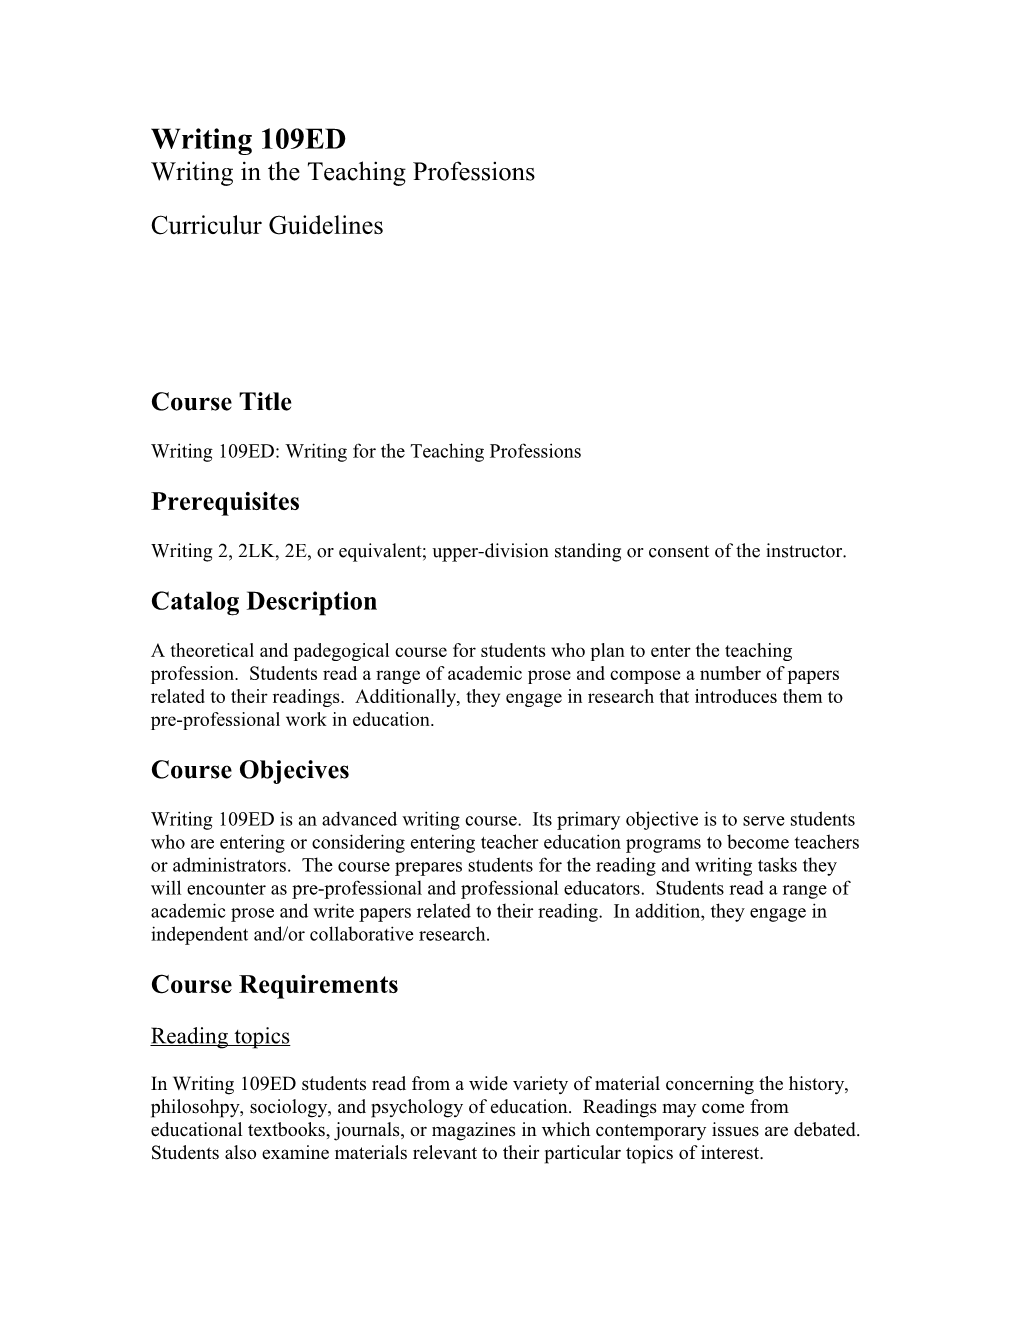 Writing in the Teaching Professions